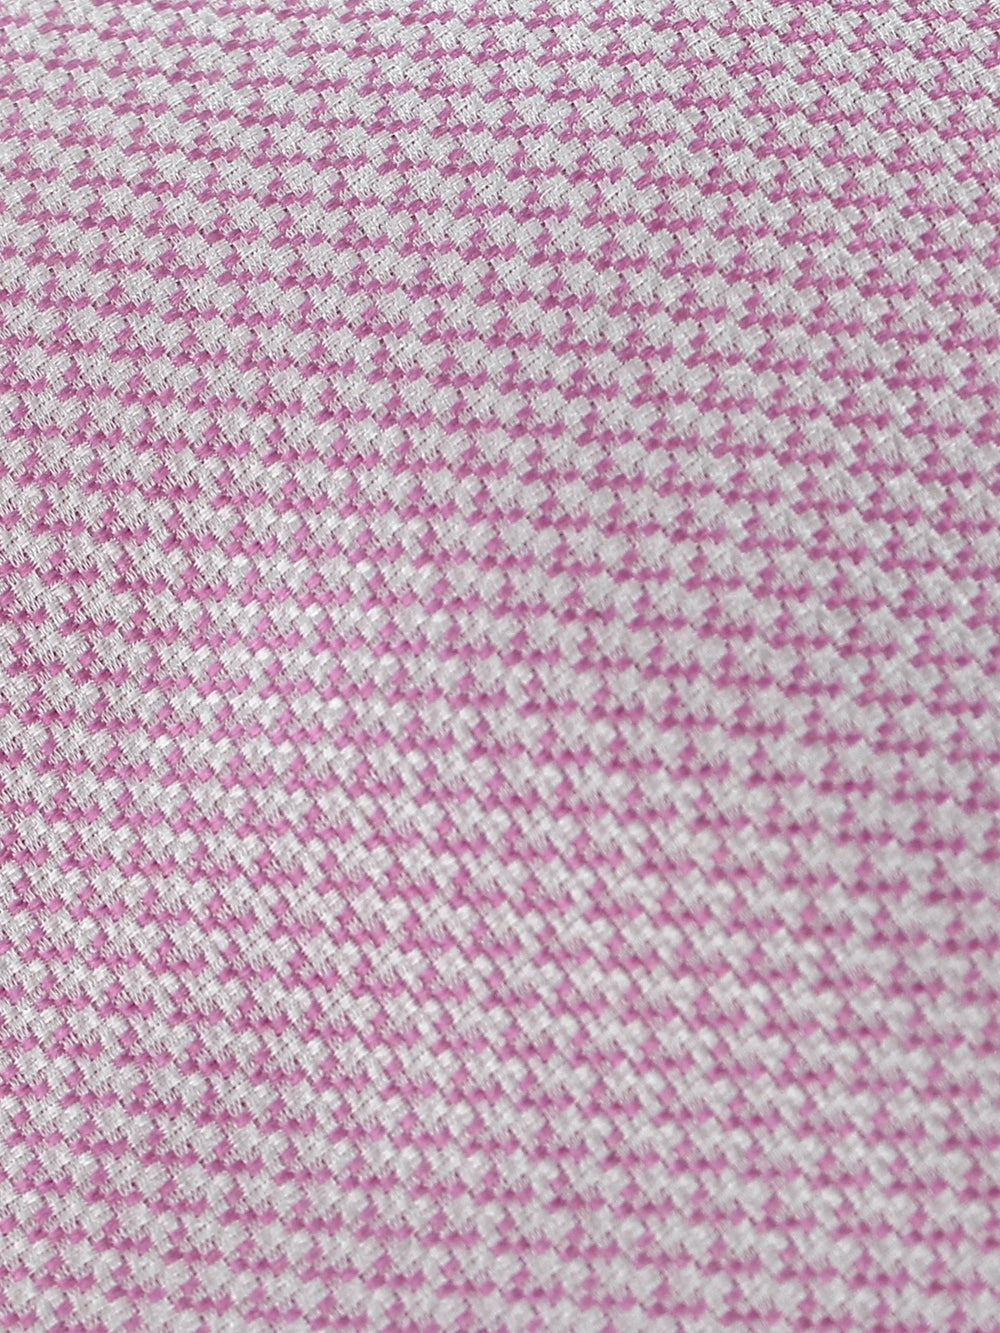 Pink tie with white patterns